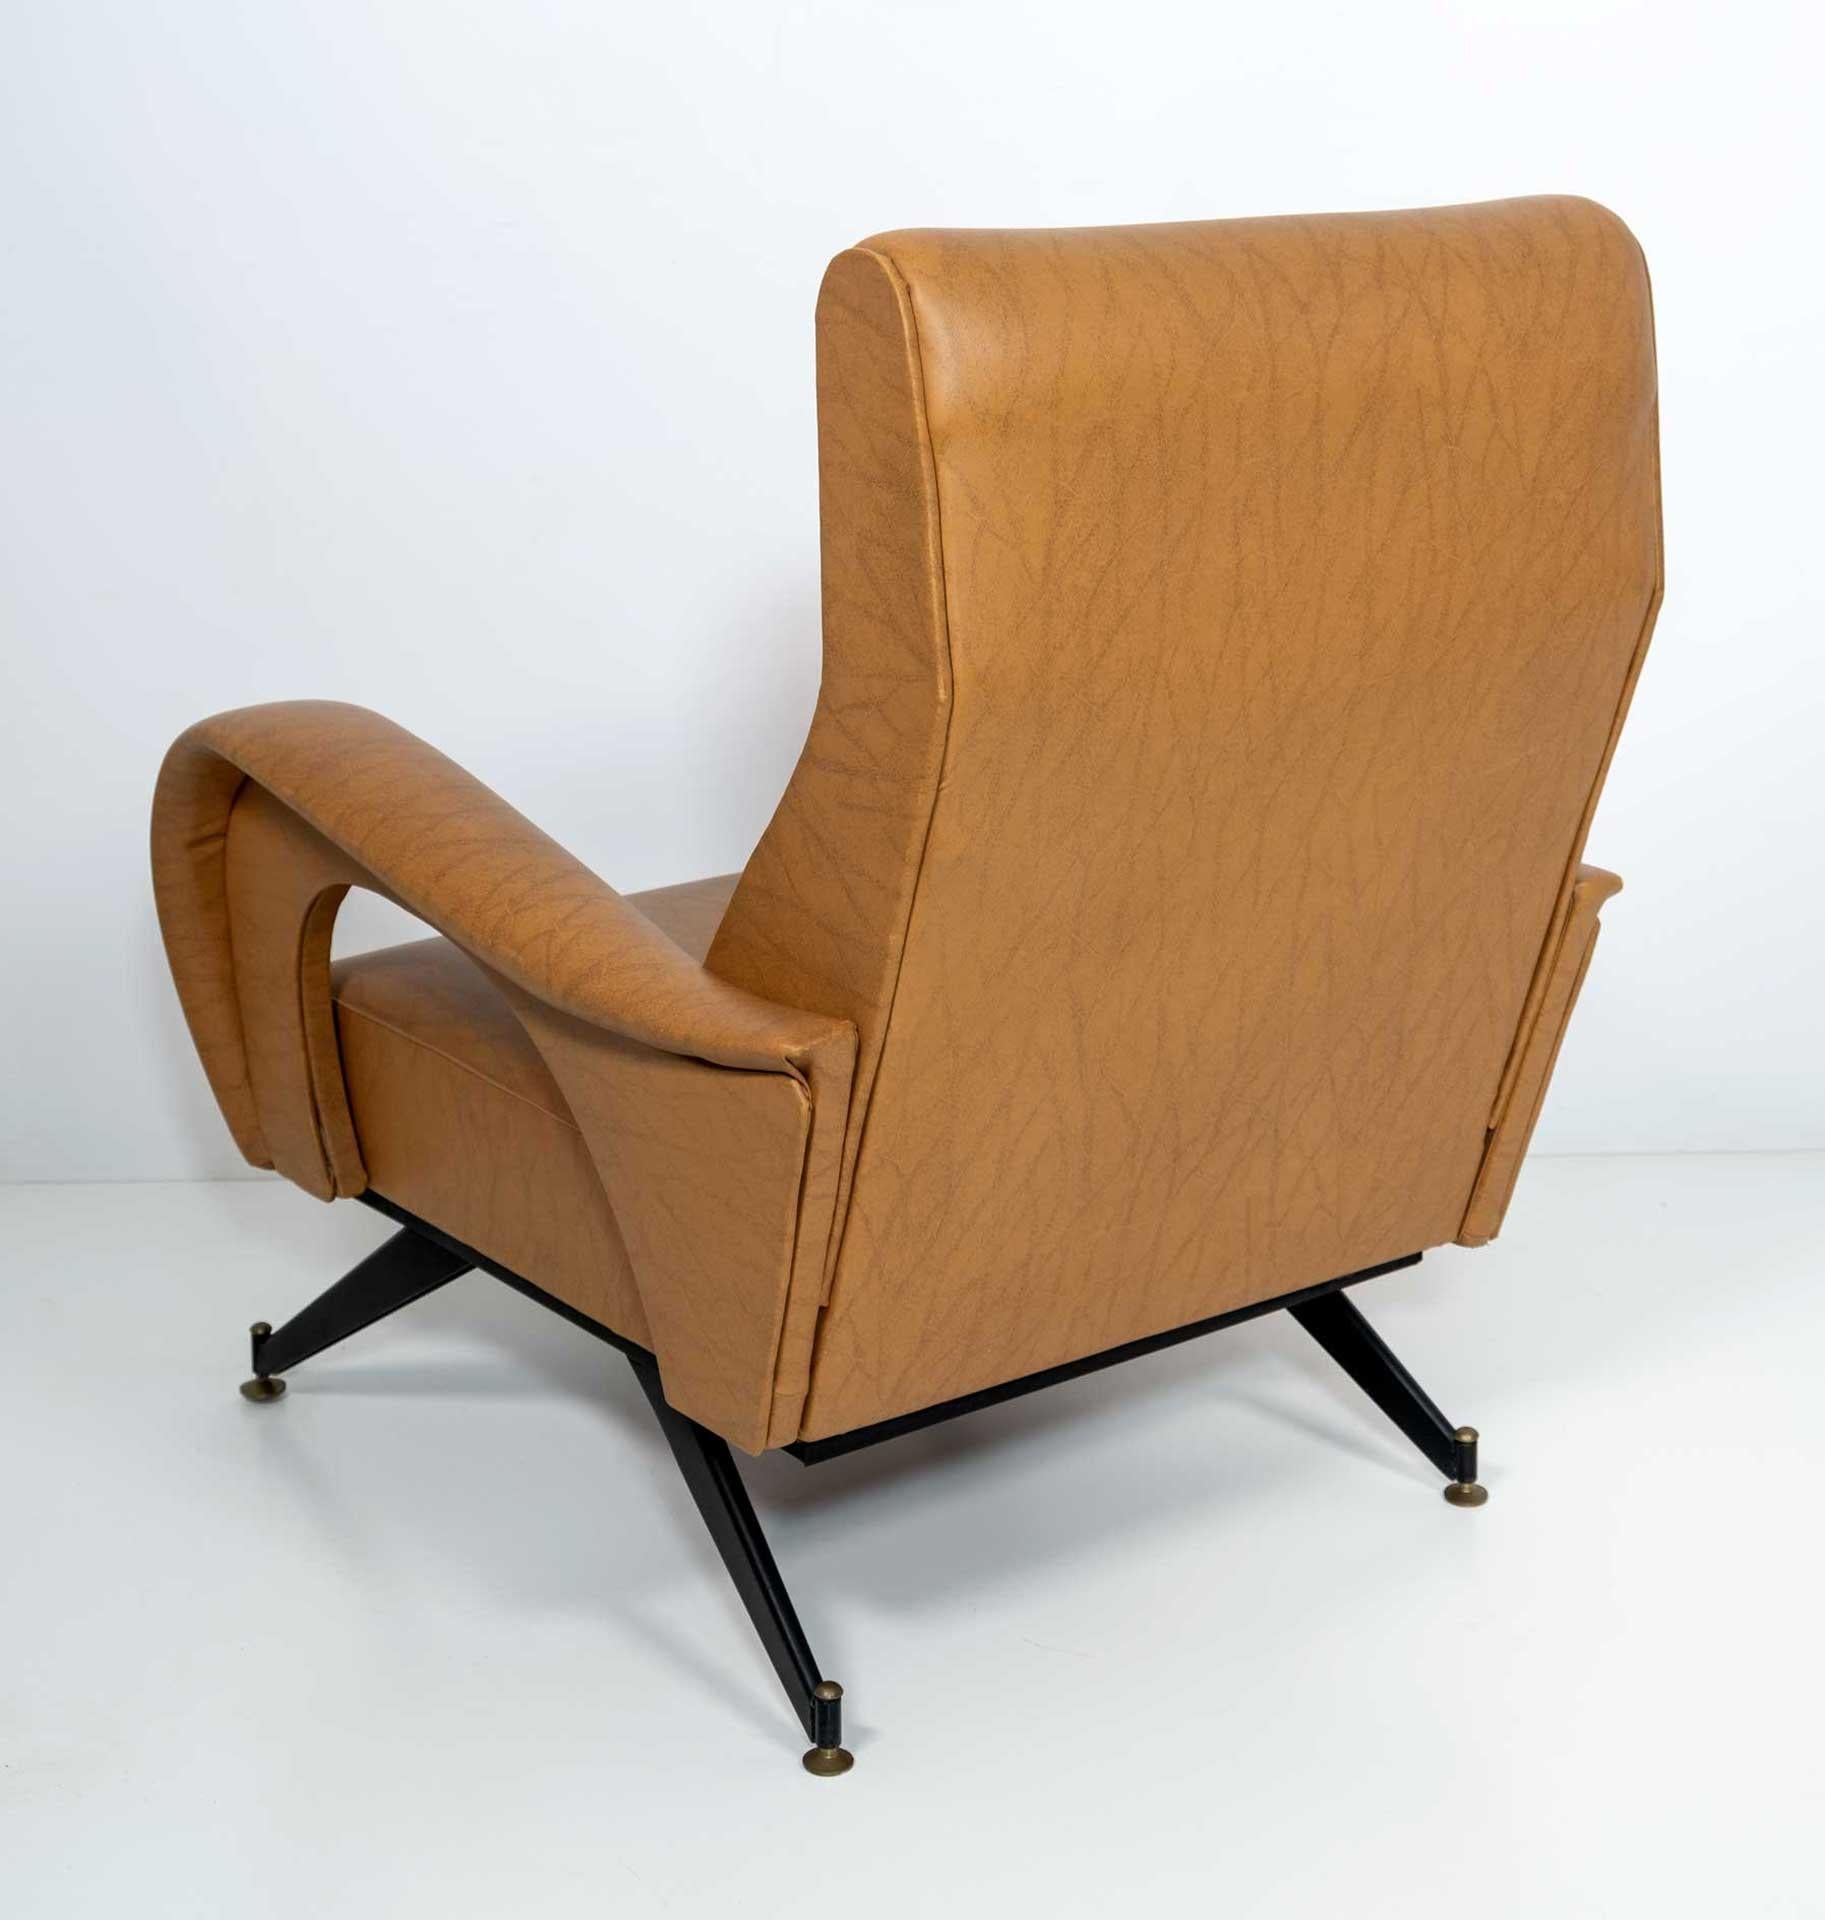 Marco Zanuso Style Mid-Century Modern Italian Leather Lounge Chair, 1970s For Sale 3